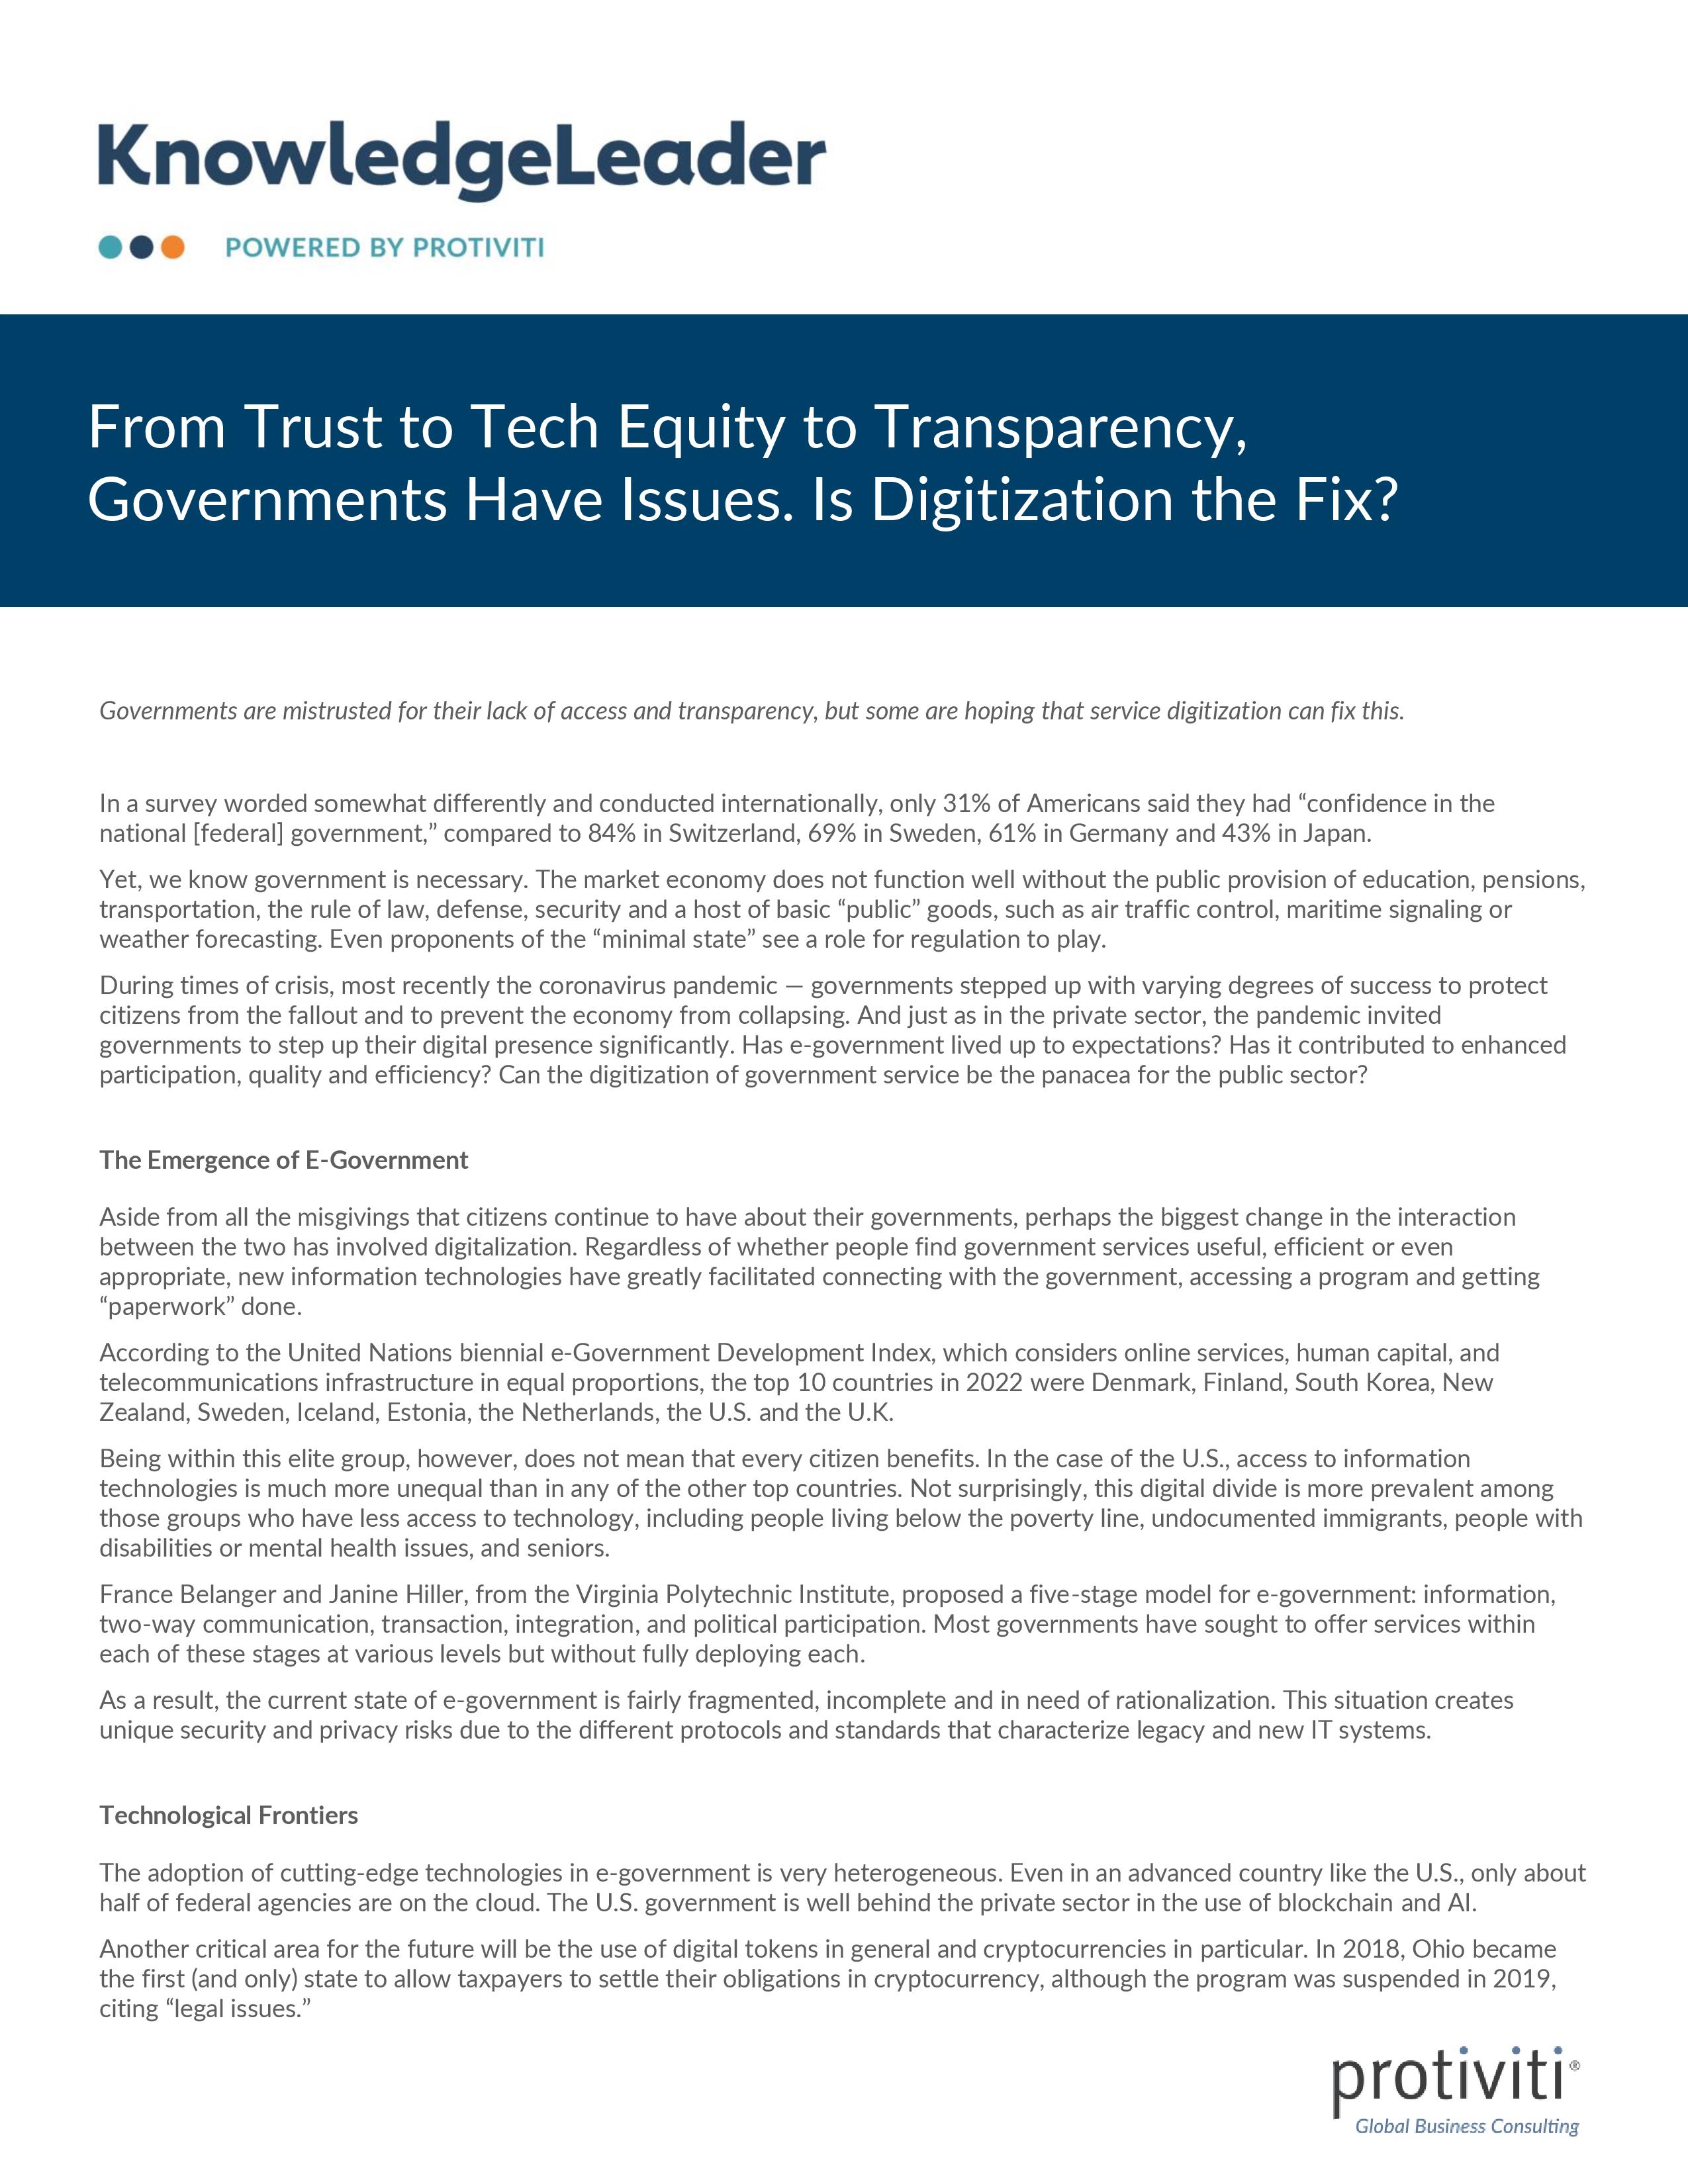 Screenshot of the first page of From Trust to Tech Equity to Transparency, Governments Have Issues Is Digitization the Fix